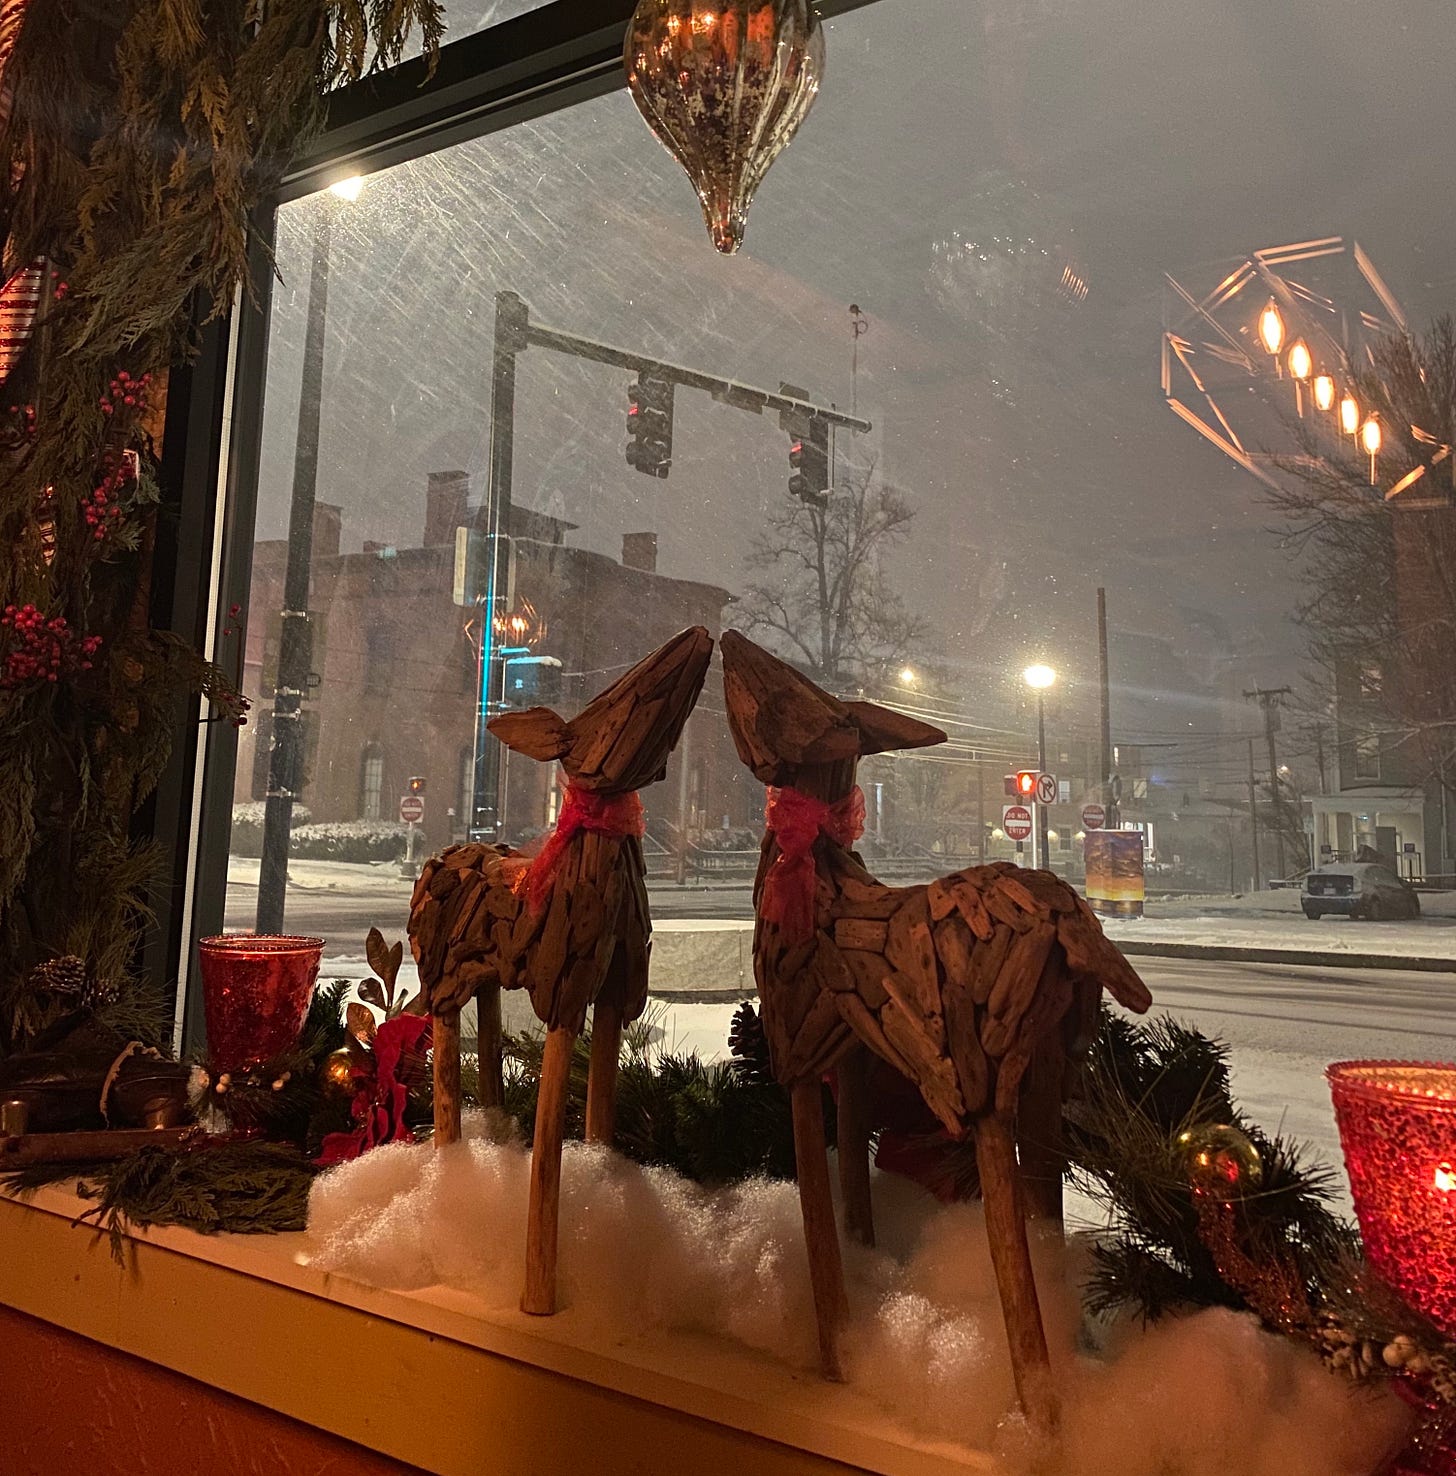 Christmas decorations, including two wooden reindeer touching noses, adorn a window. Out of the window, you can see a street corner covered in snow, and snow falling diagonally in the night. 